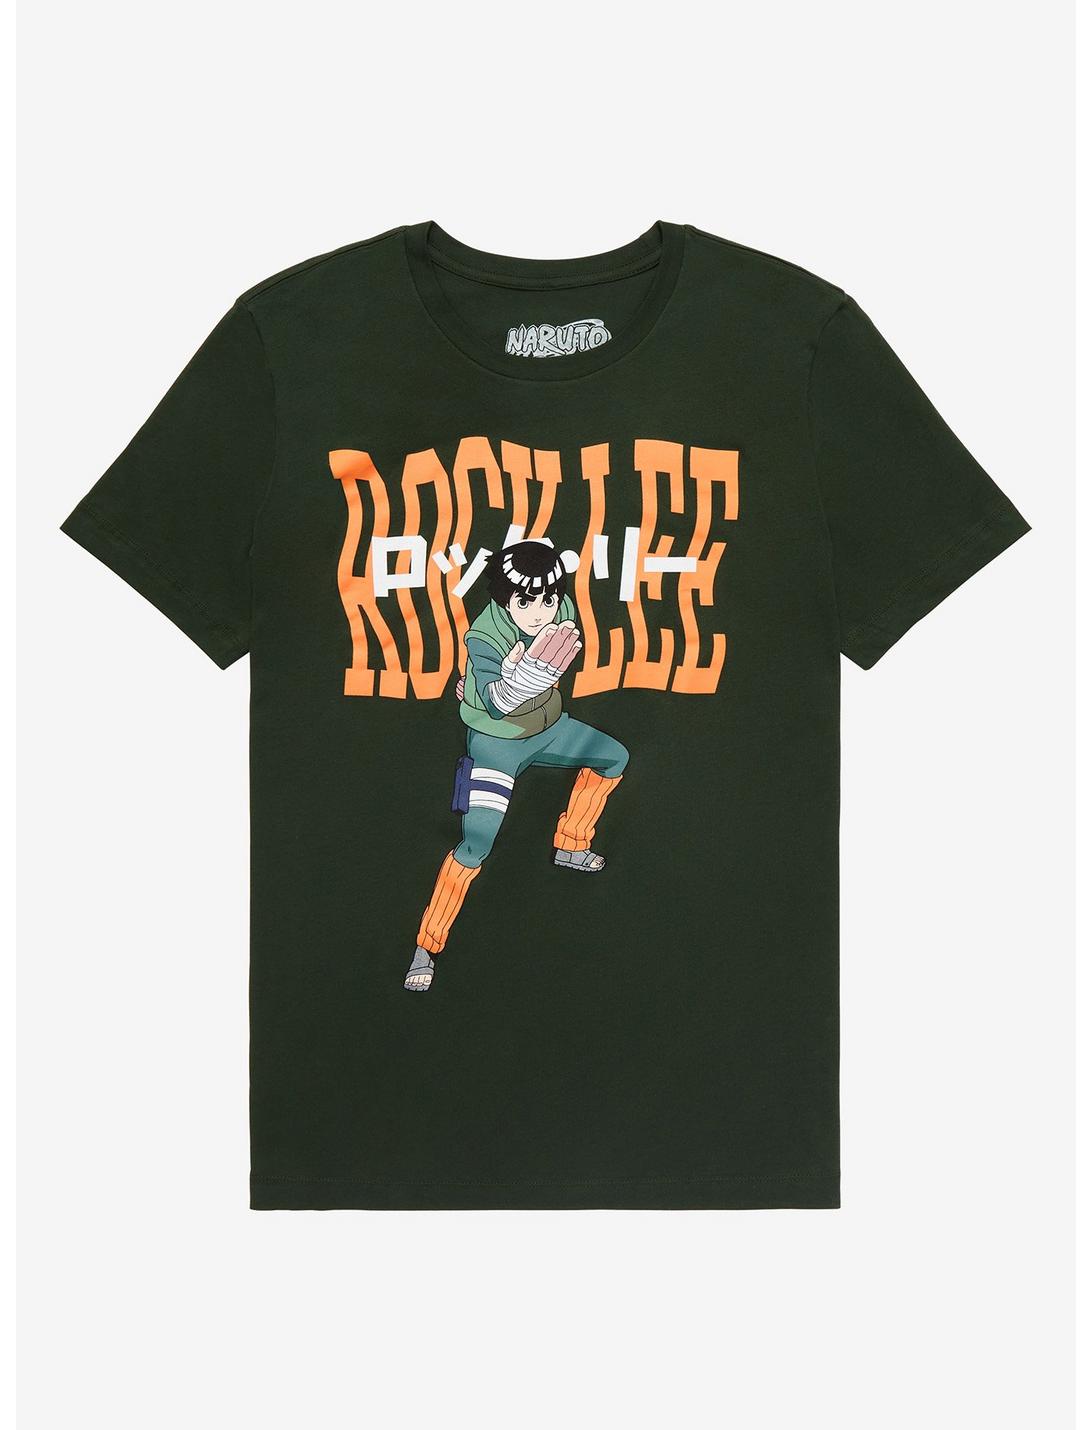 Naruto Shippuden Rock Lee Battle Pose T-Shirt - BoxLunch Exlcusive, FOREST GREEN, hi-res